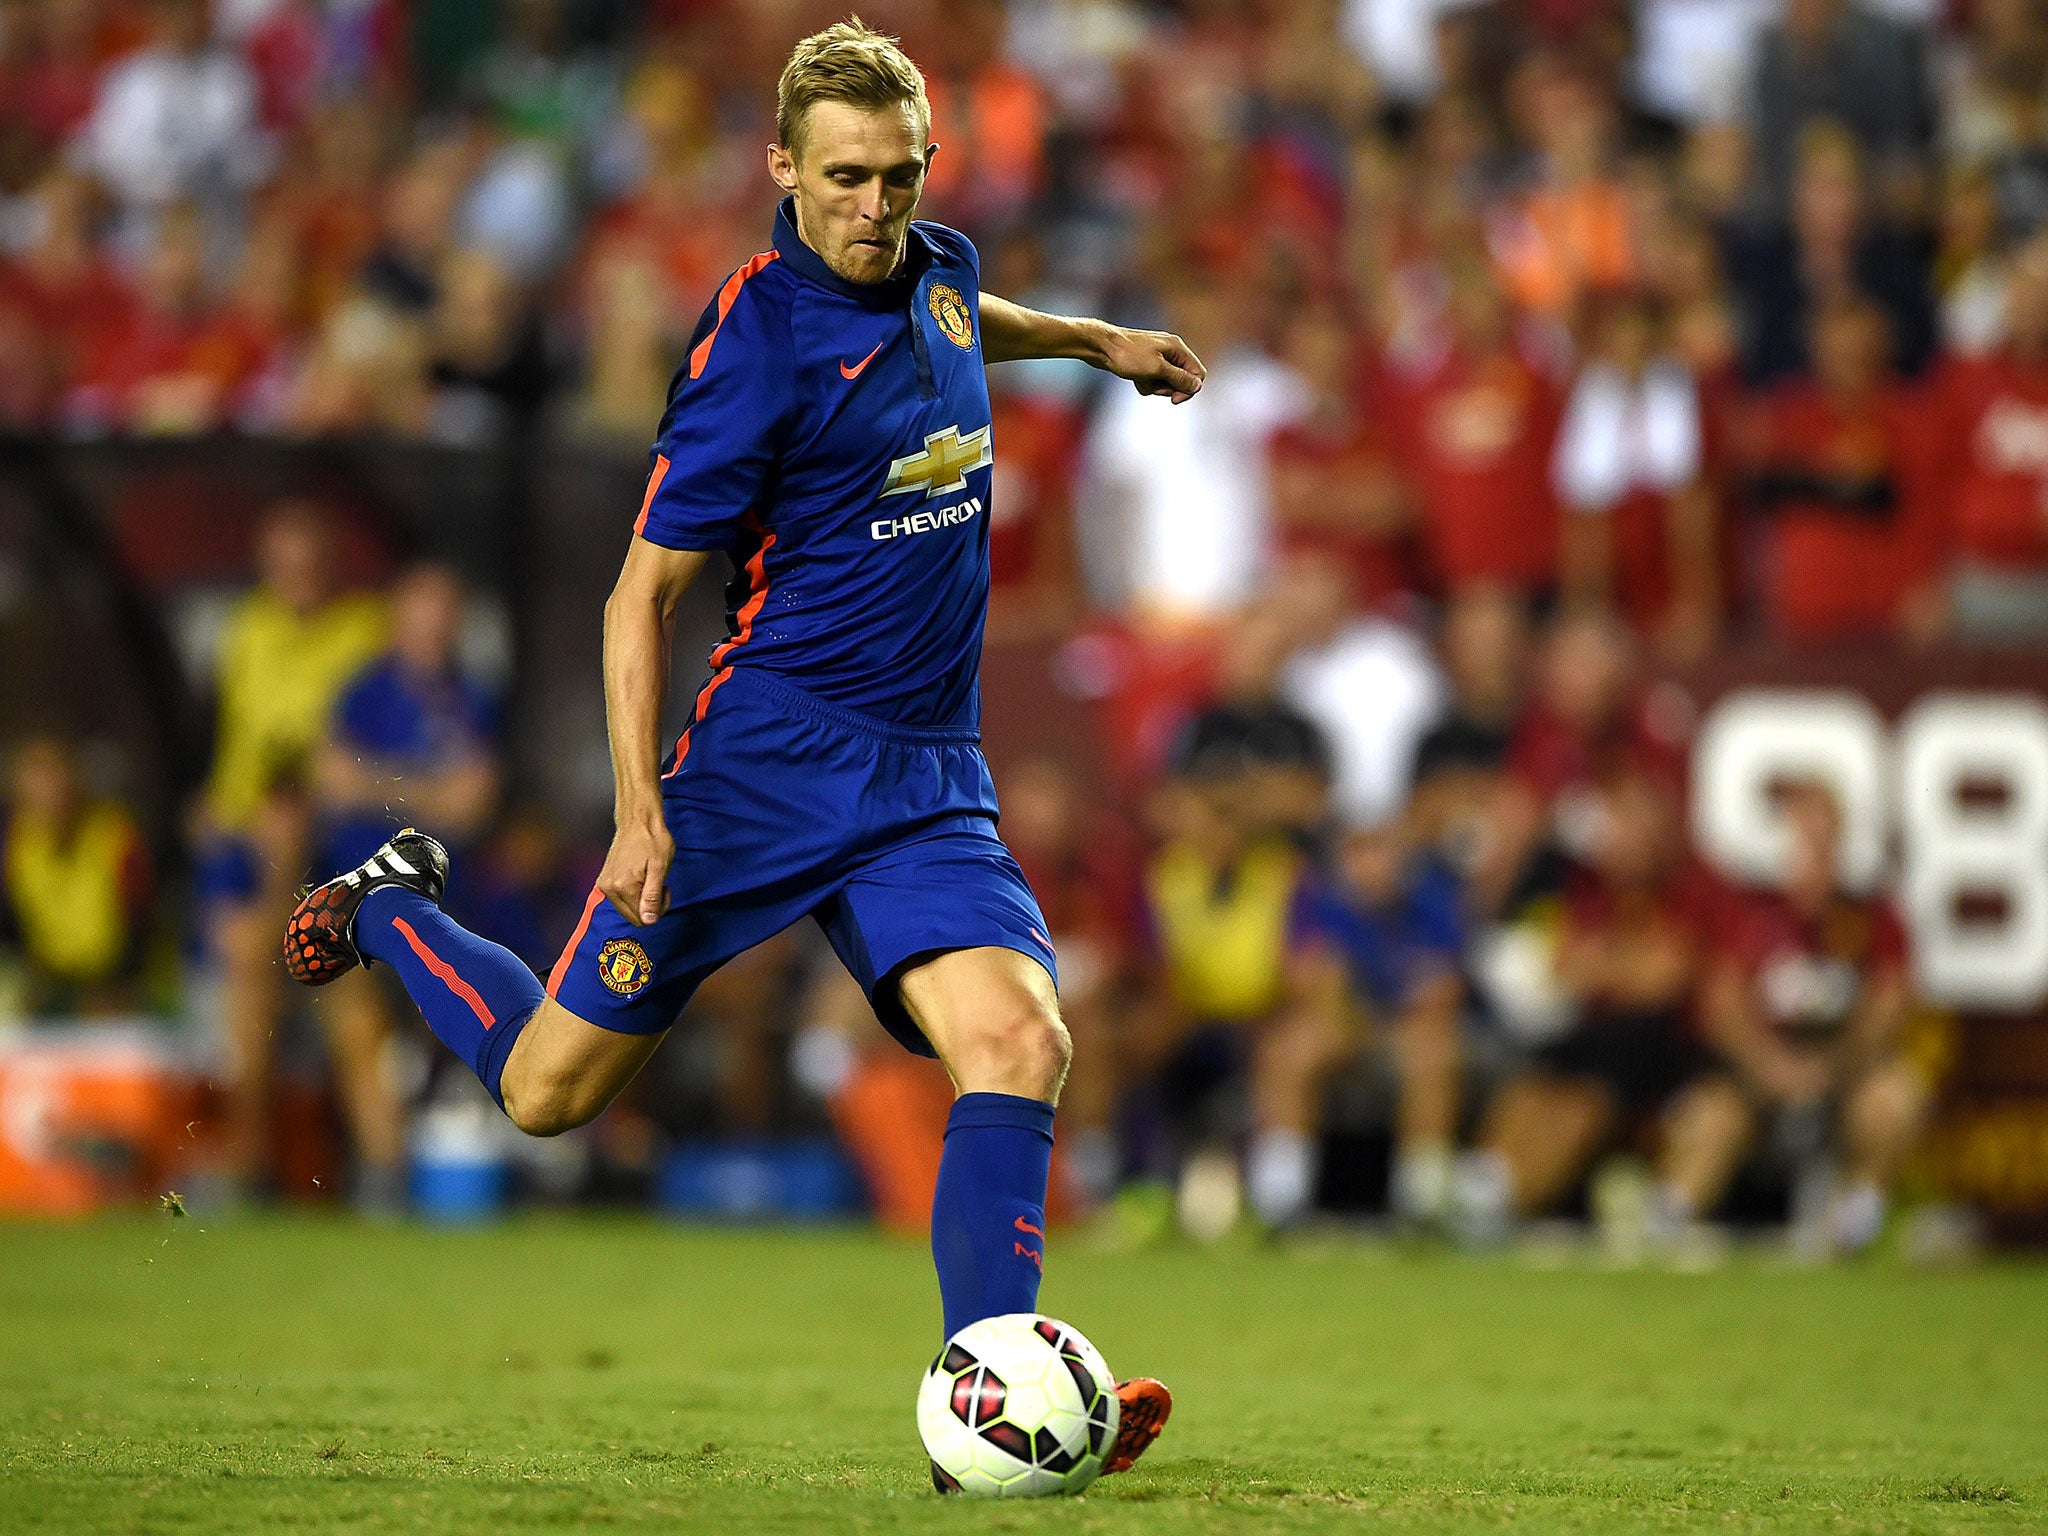 Darren Fletcher says Manchester United could win the Premier League this season